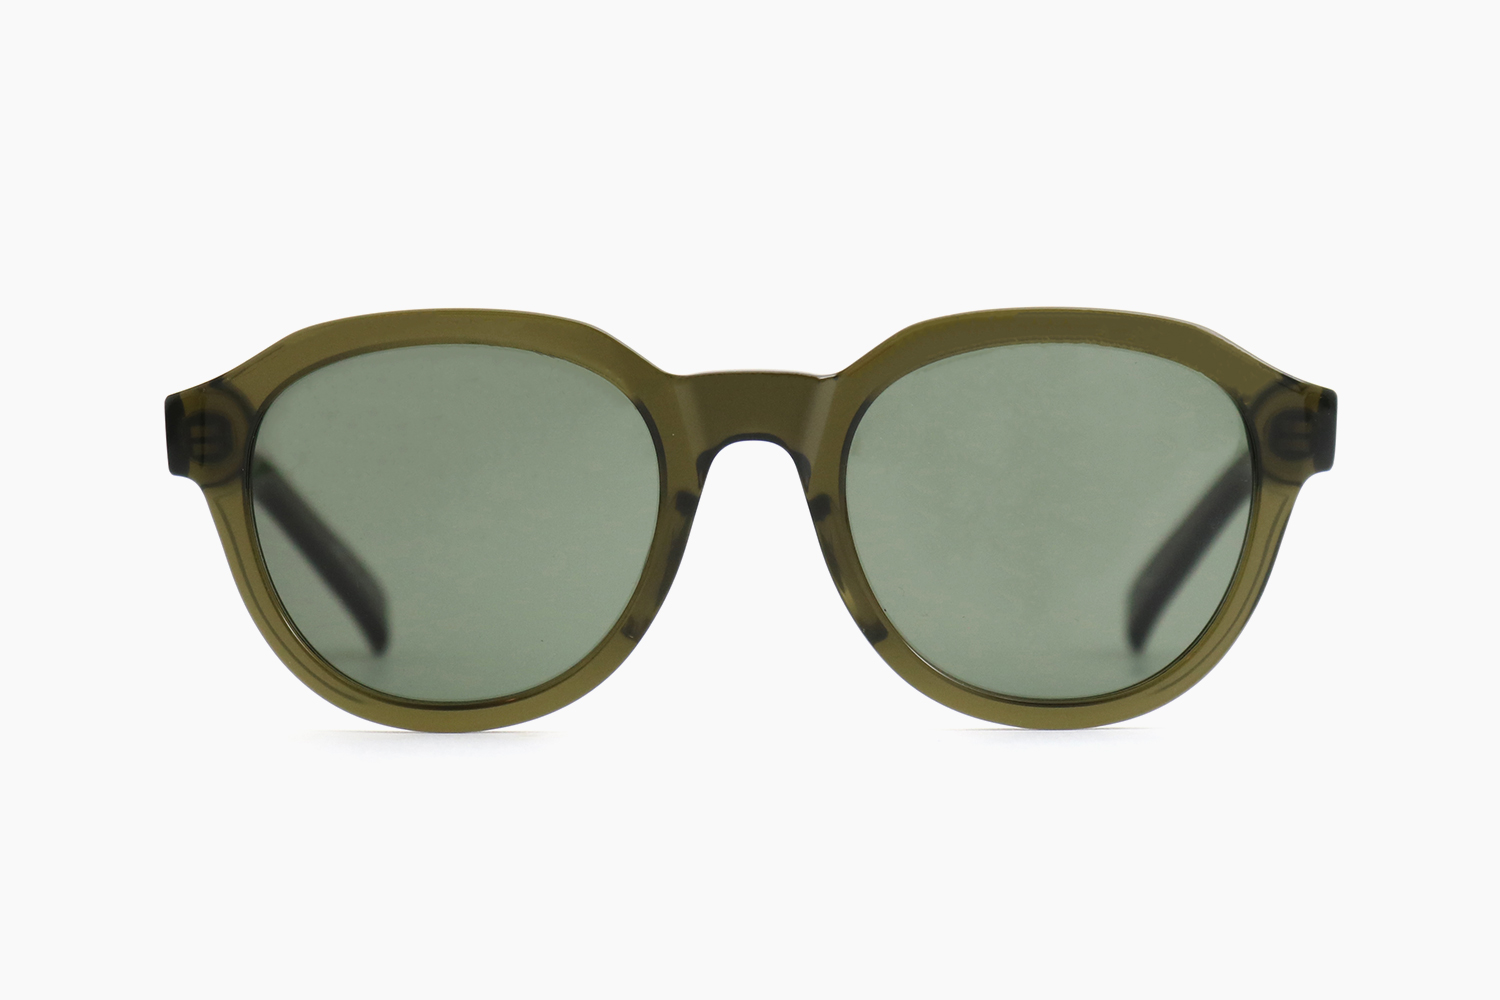 UNIVERSAL PRODUCTS. + Noritake x The PARKSIDE ROOM｜tpr-006 - KHAKI SG｜The PARKSIDE ROOM